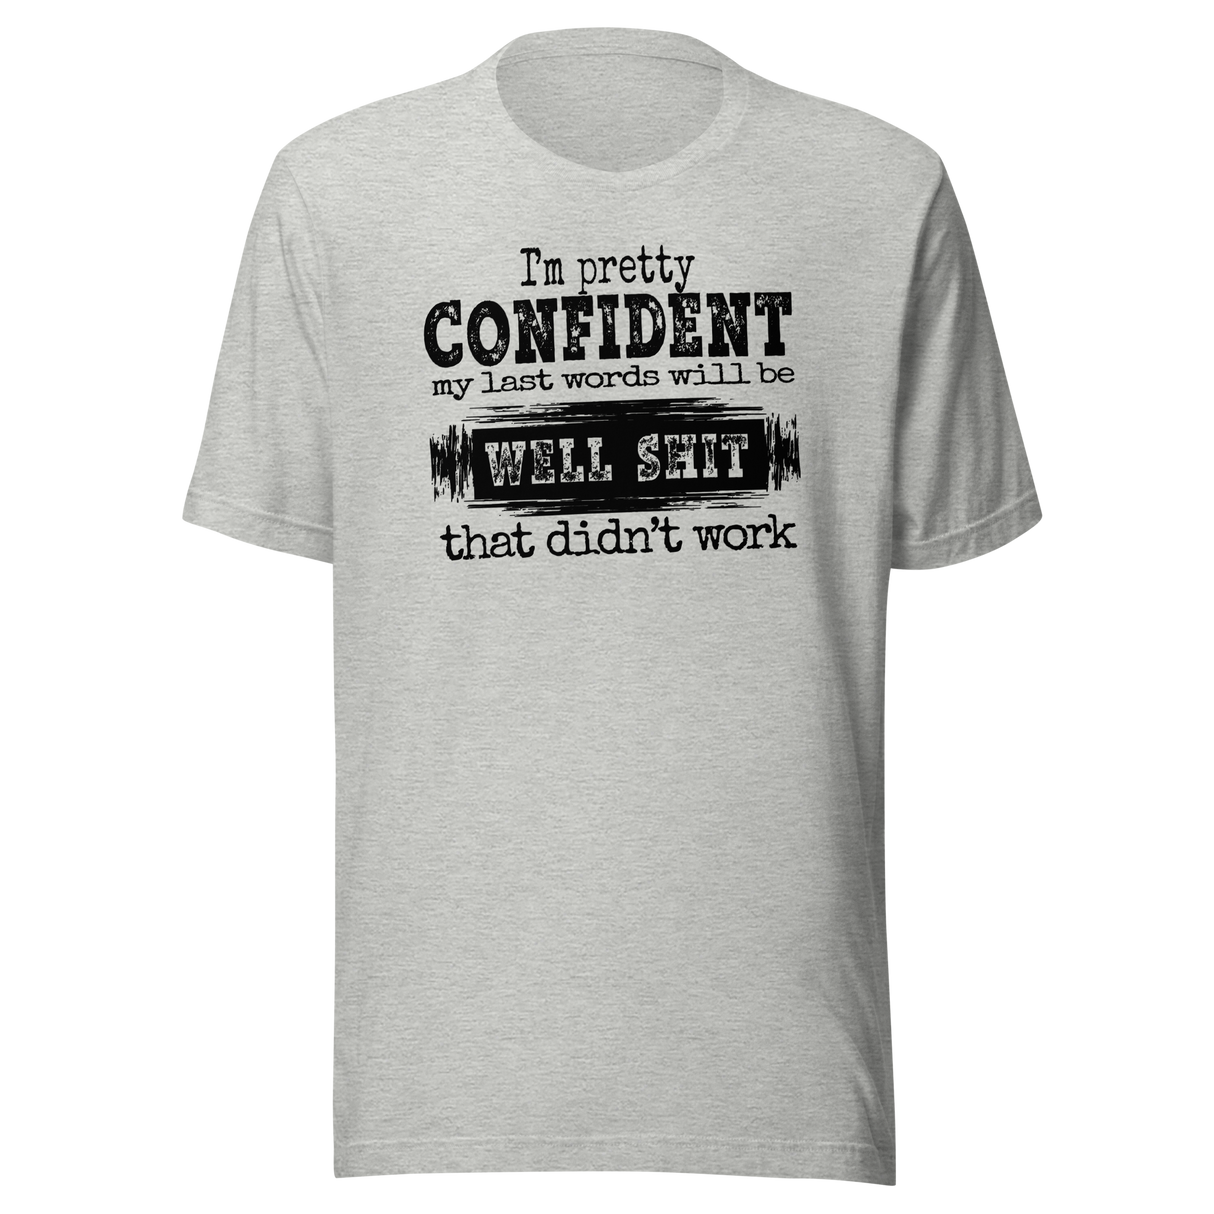 im-pretty-confident-my-last-words-will-be-well-shit-that-didnt-work-life-tee-funny-t-shirt-life-tee-humor-t-shirt-confidence-tee#color_athletic-heather